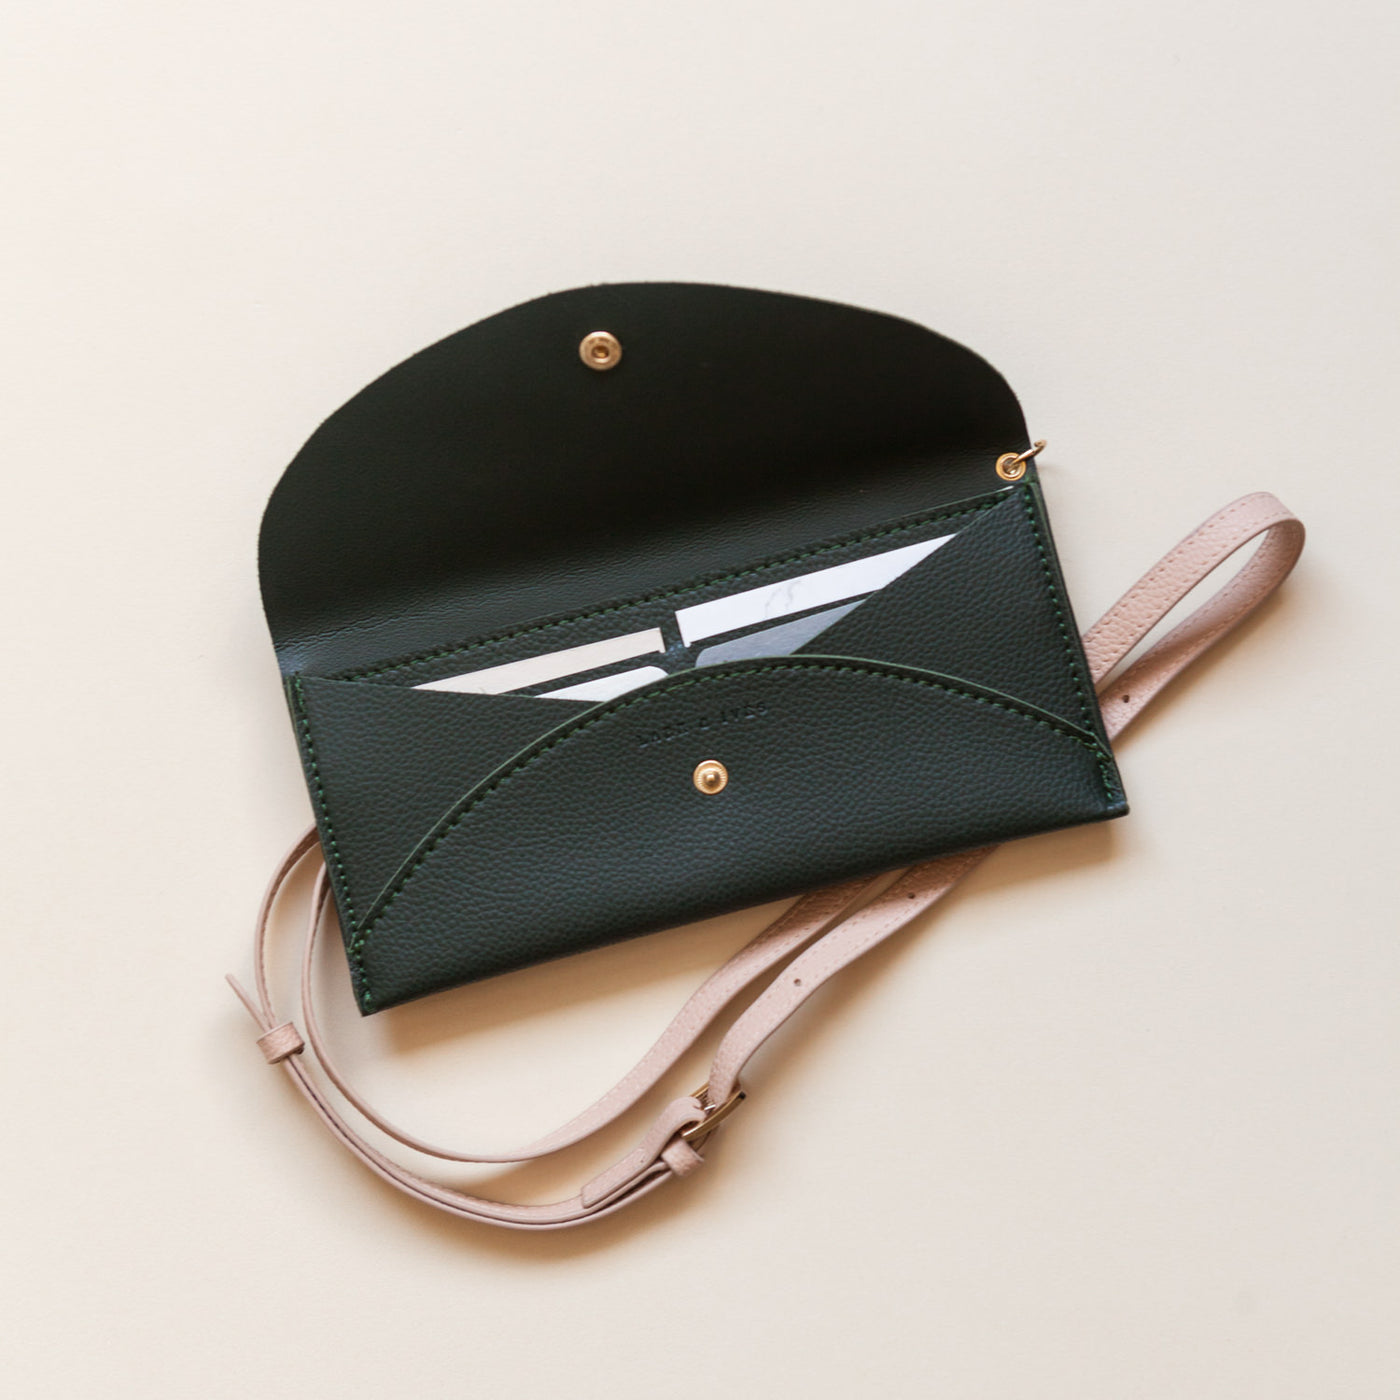 Lark and Ives Dark Green Purse / Long Wallet / Slim Wallet / Small Purse / Vegan Leather Accessories